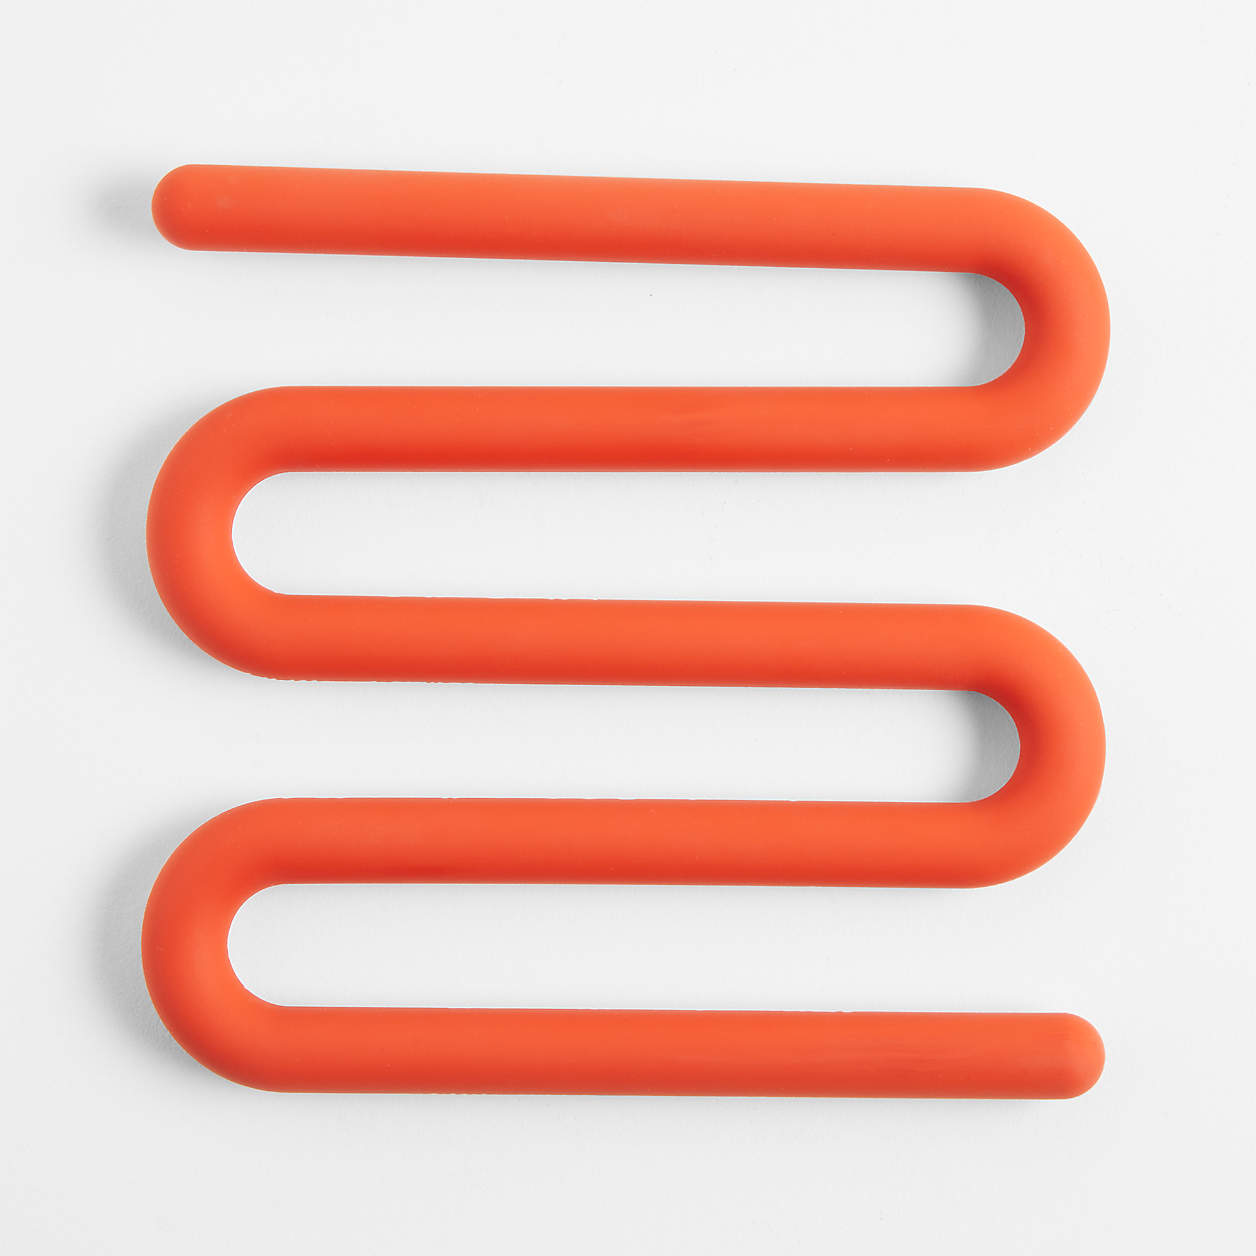 Red Silicone Trivet by Molly Baz